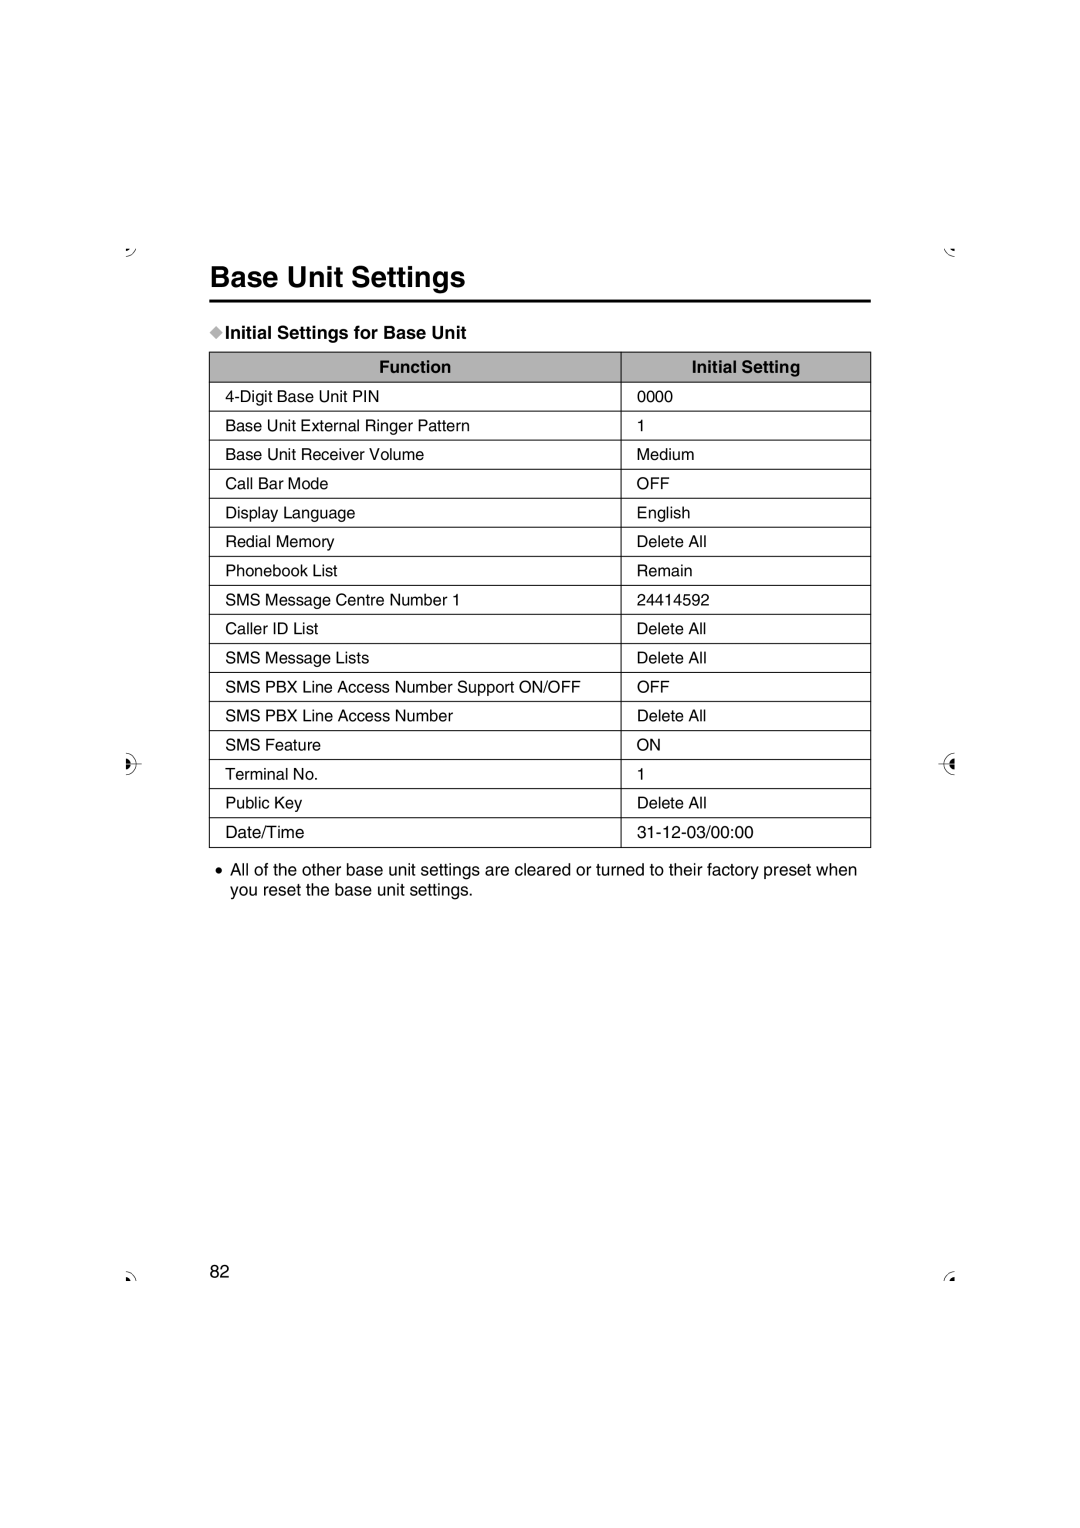 Panasonic KX-TCD535HK operating instructions Initial Settings for Base Unit Function, Off 